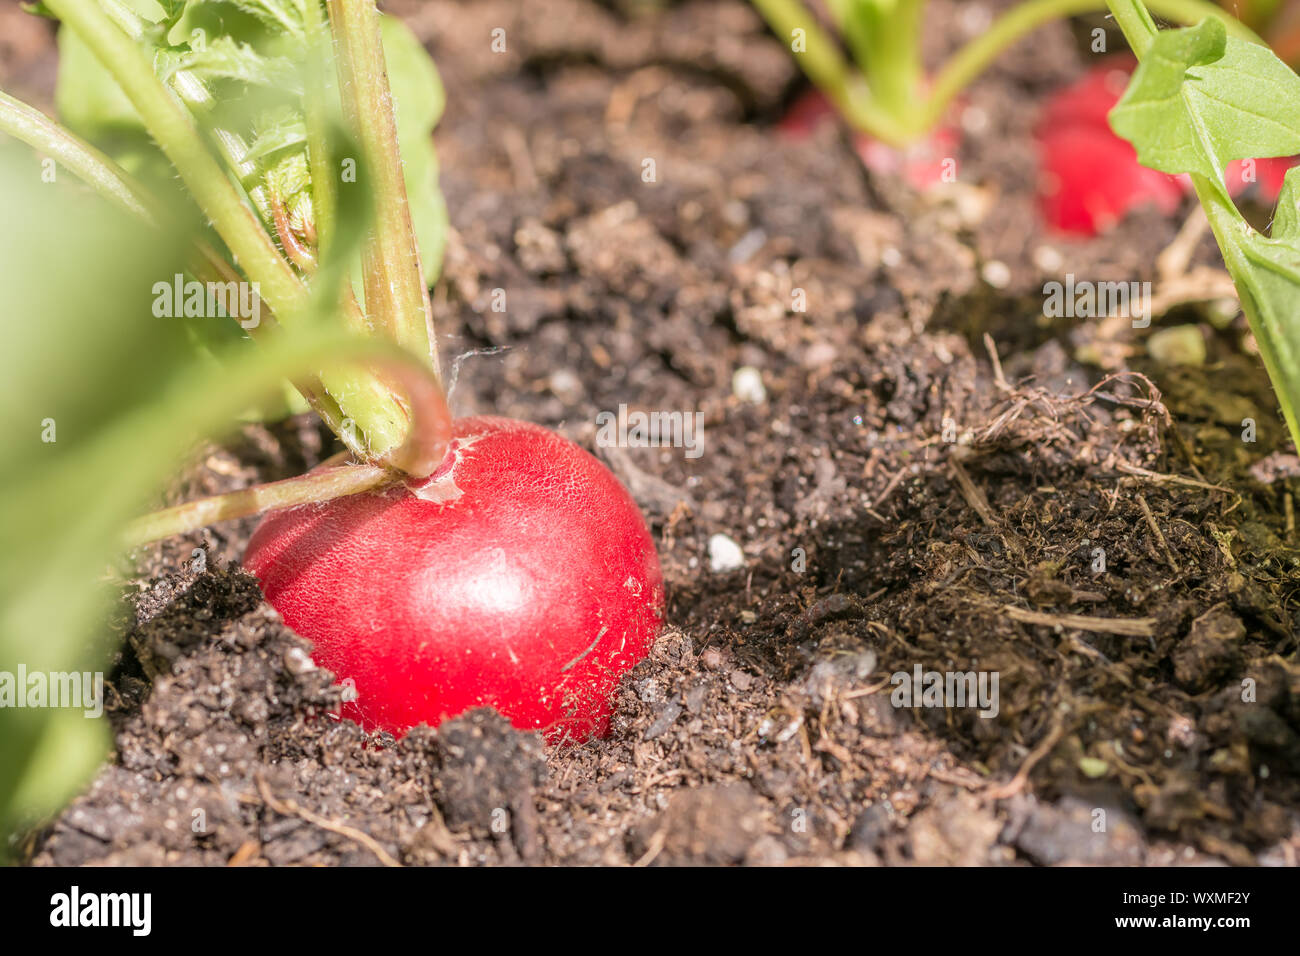 Cultivation of delicious radishes in the home garden Stock Photo